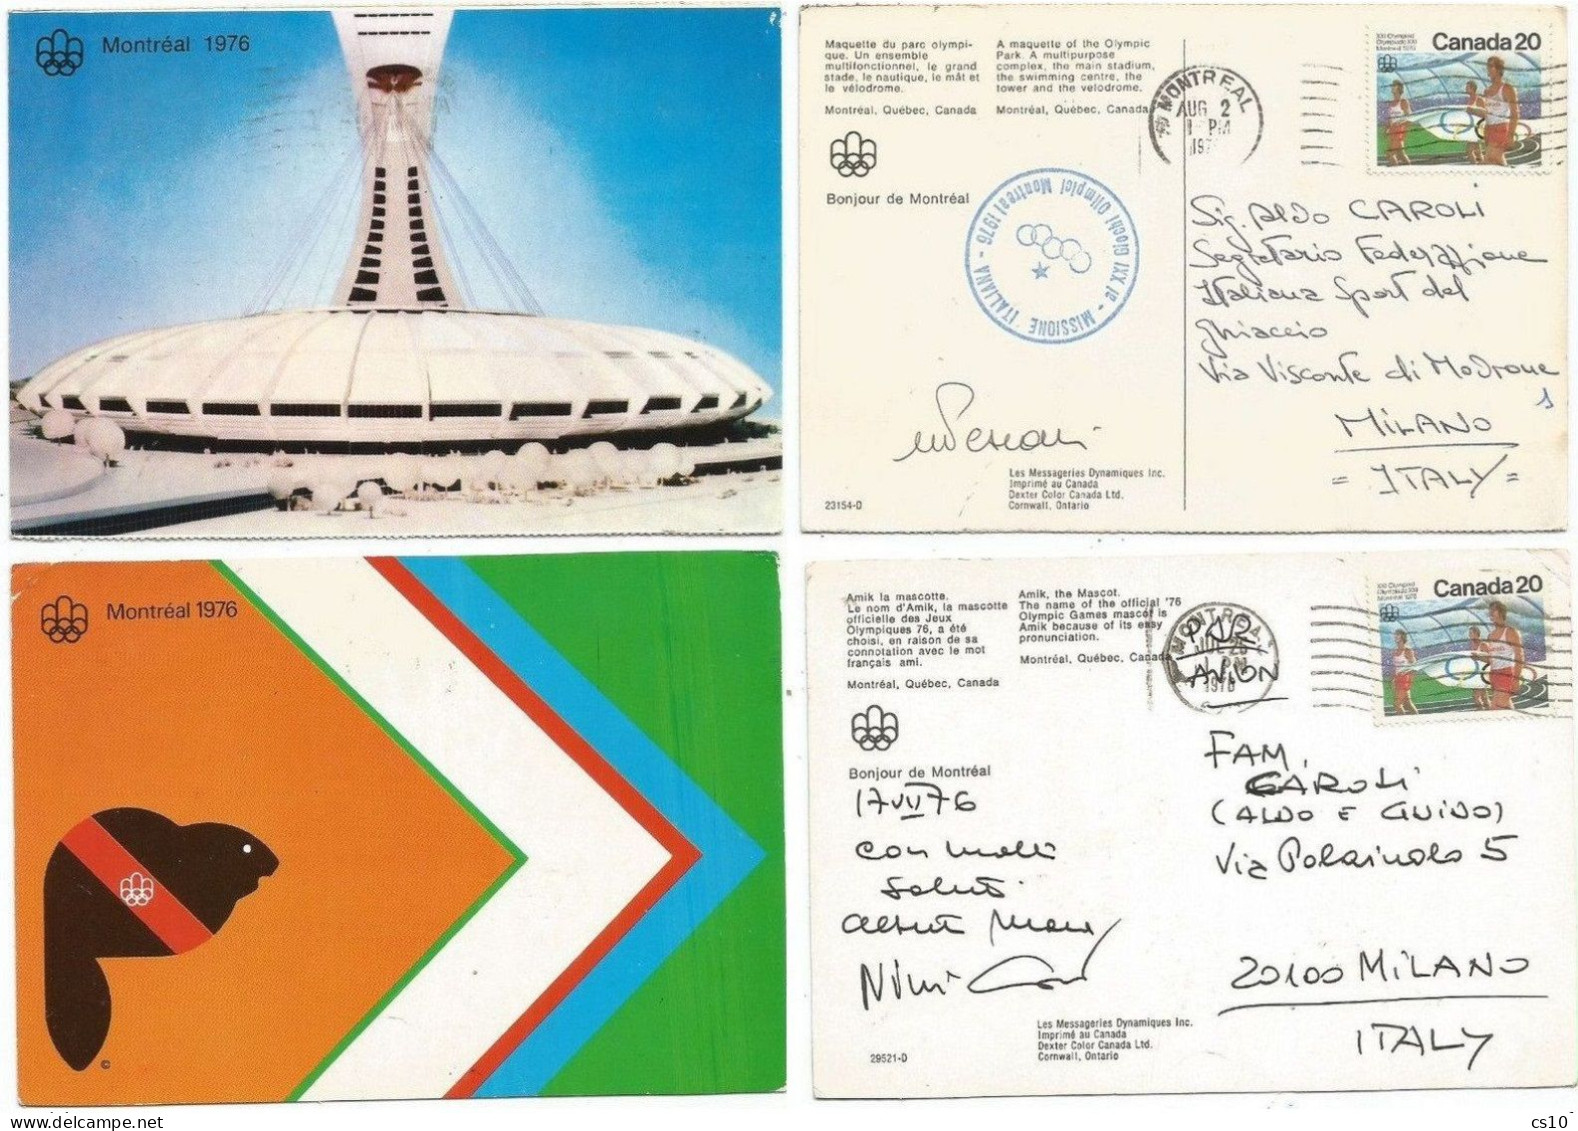 Olympic Games 1976 Montreal - Italia Mission - #2 Event Pcards By Athletes To Ice Sports Fed. President - Cartoline Maximum